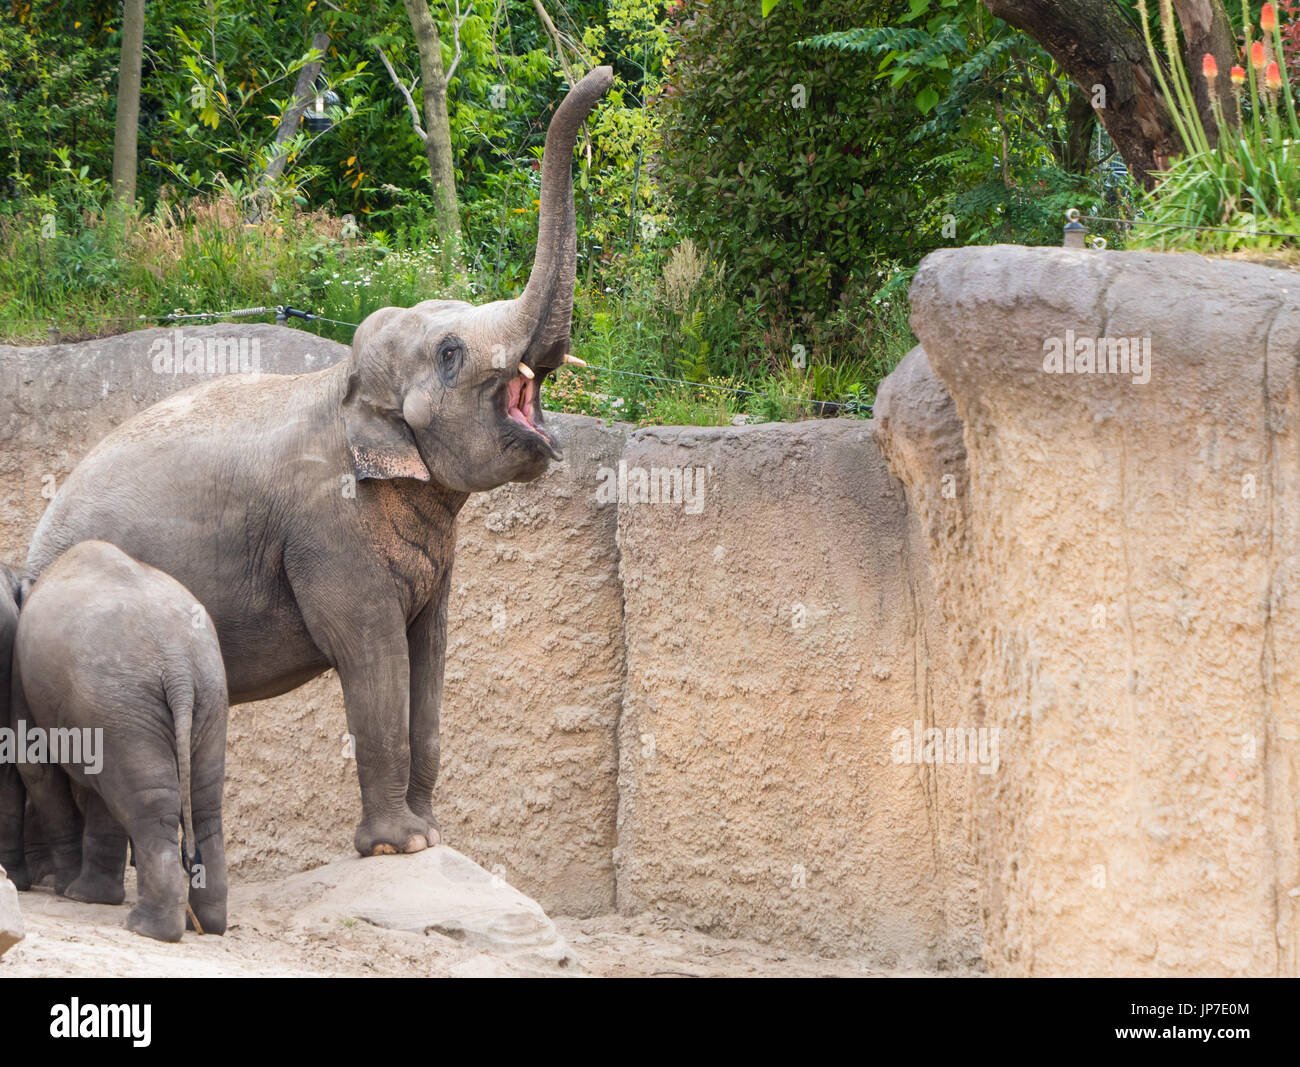 Elphant honks with big open mouth and trunk lifted high Stock Photo